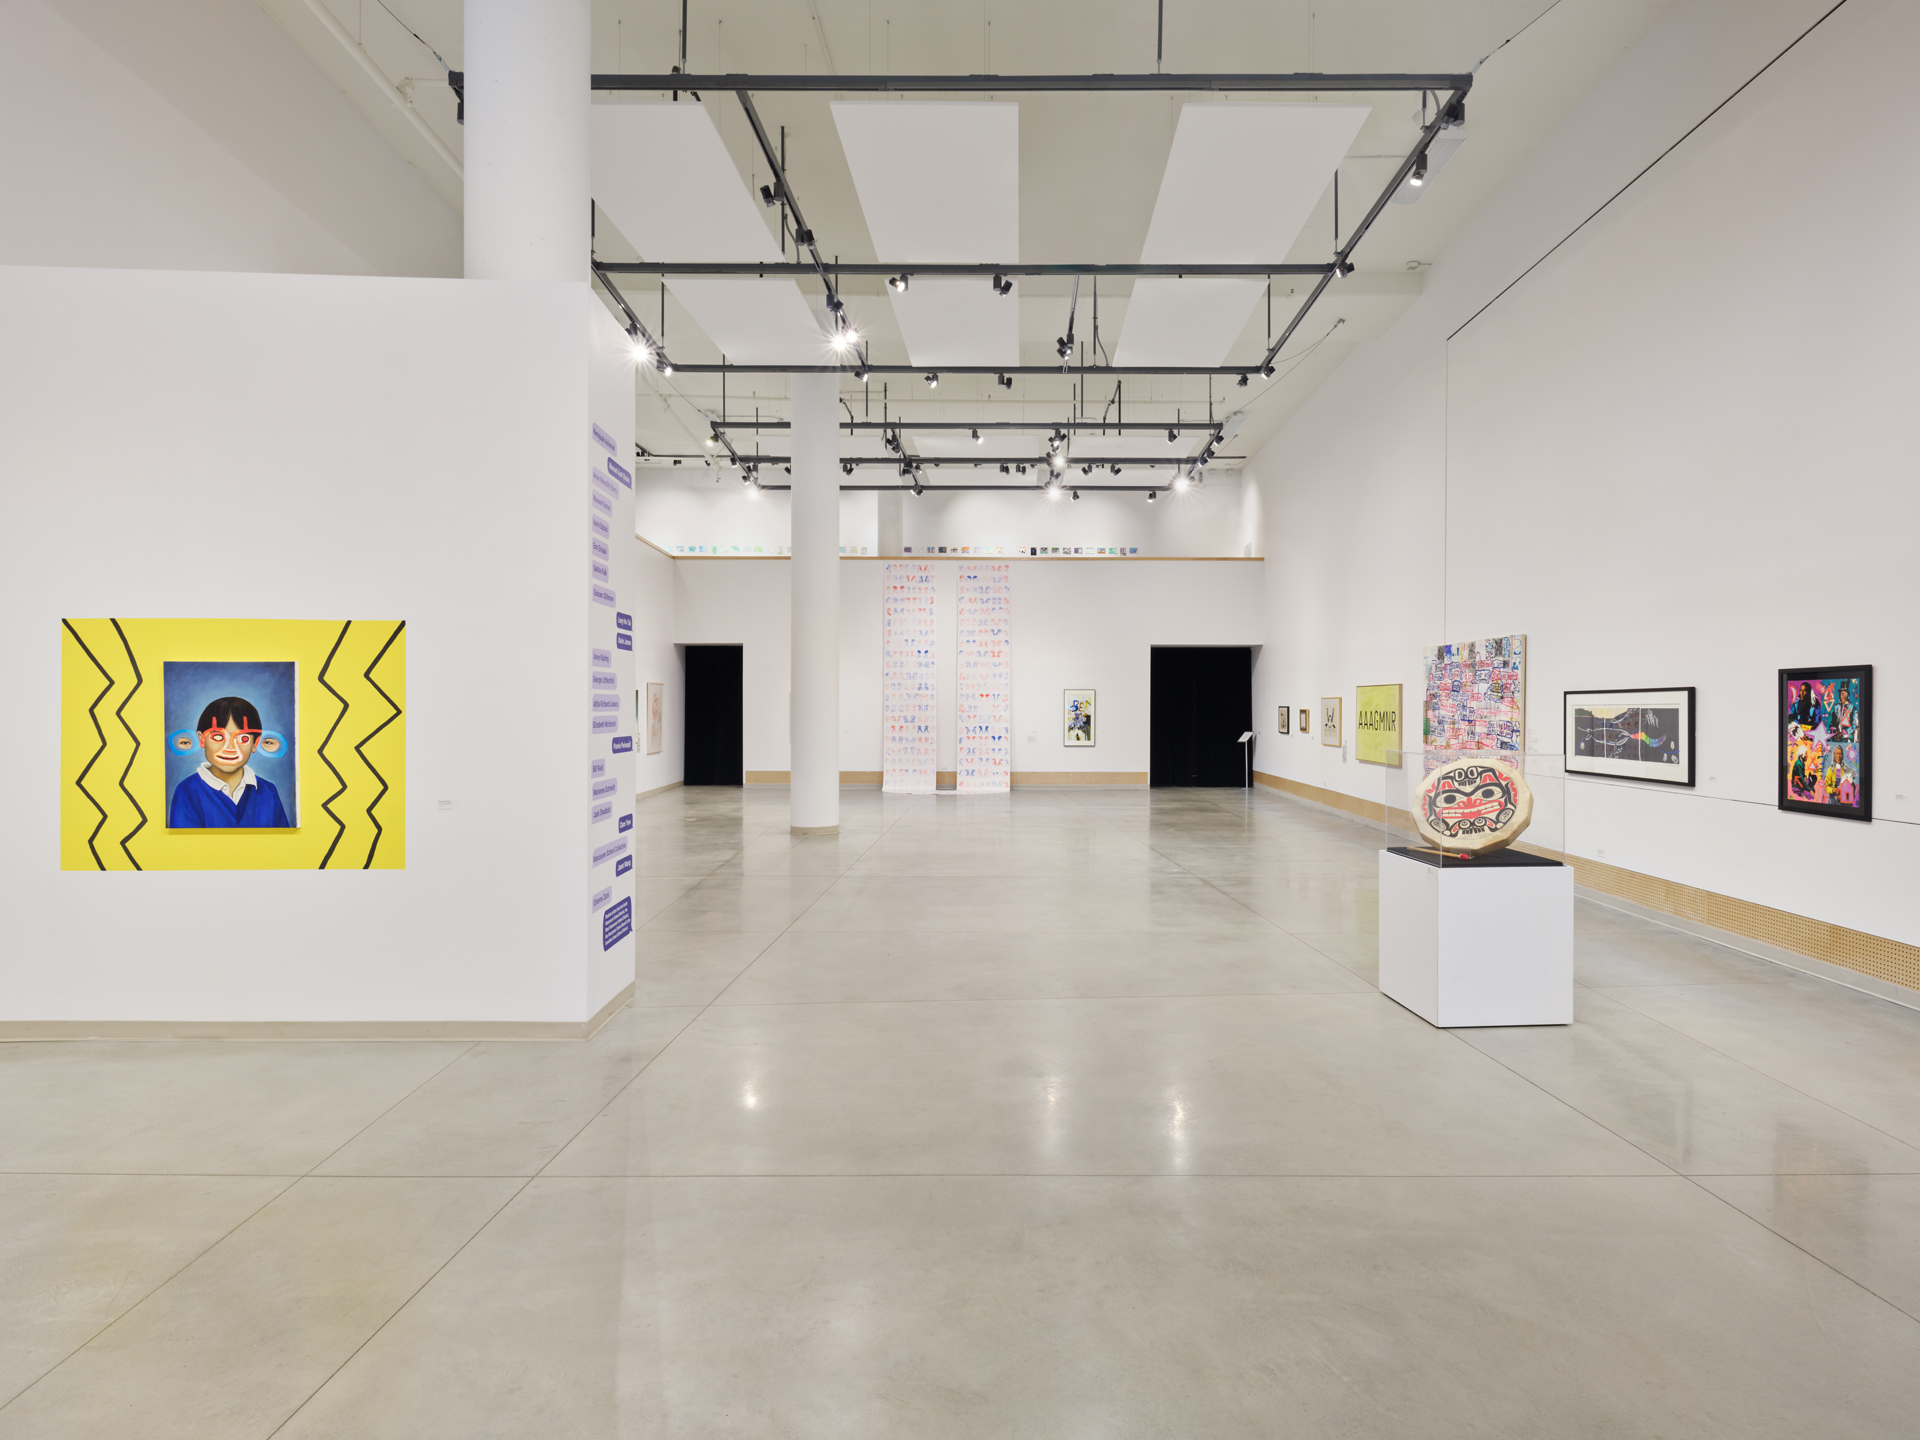 Installation photo: The Art of Conversation, curated by Janet Wang and Amelia Epp. Photo by Rachel Topham Photography.